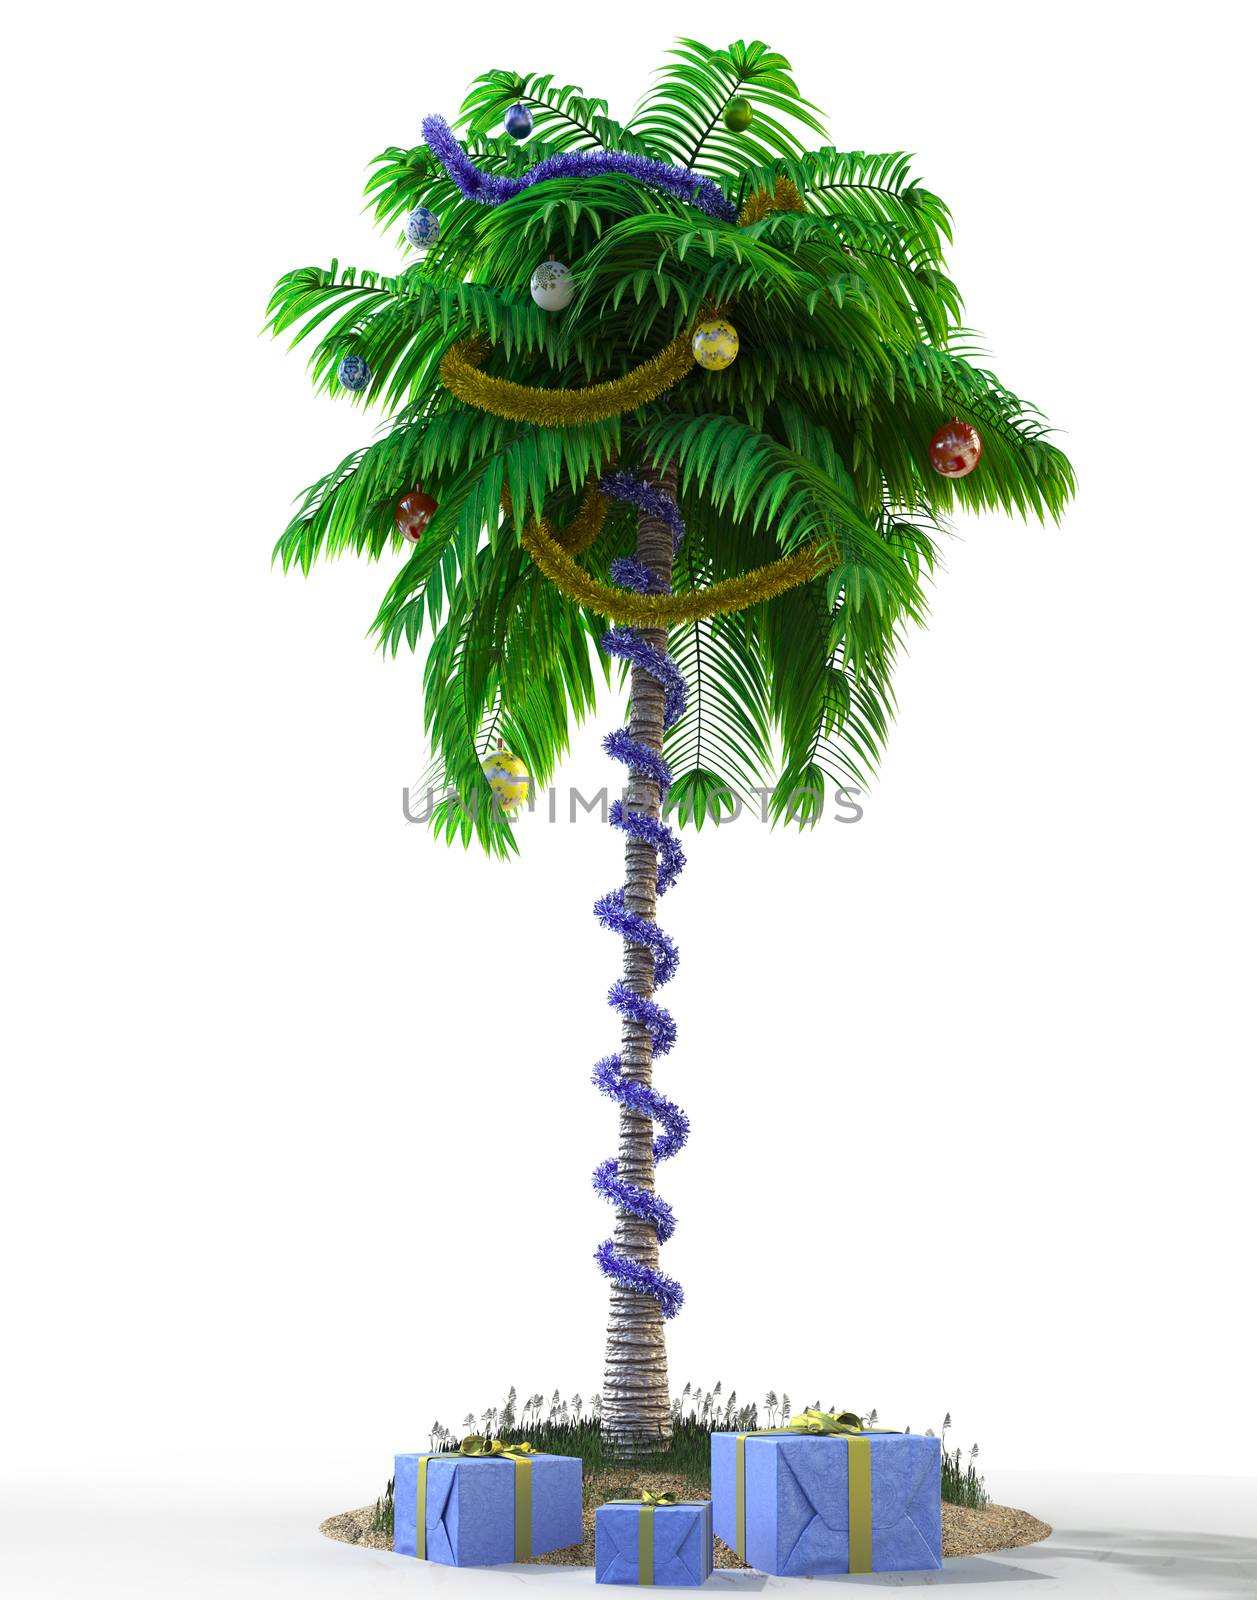 Isolate New Year palm tree with decoration concept holiday element by denisgo